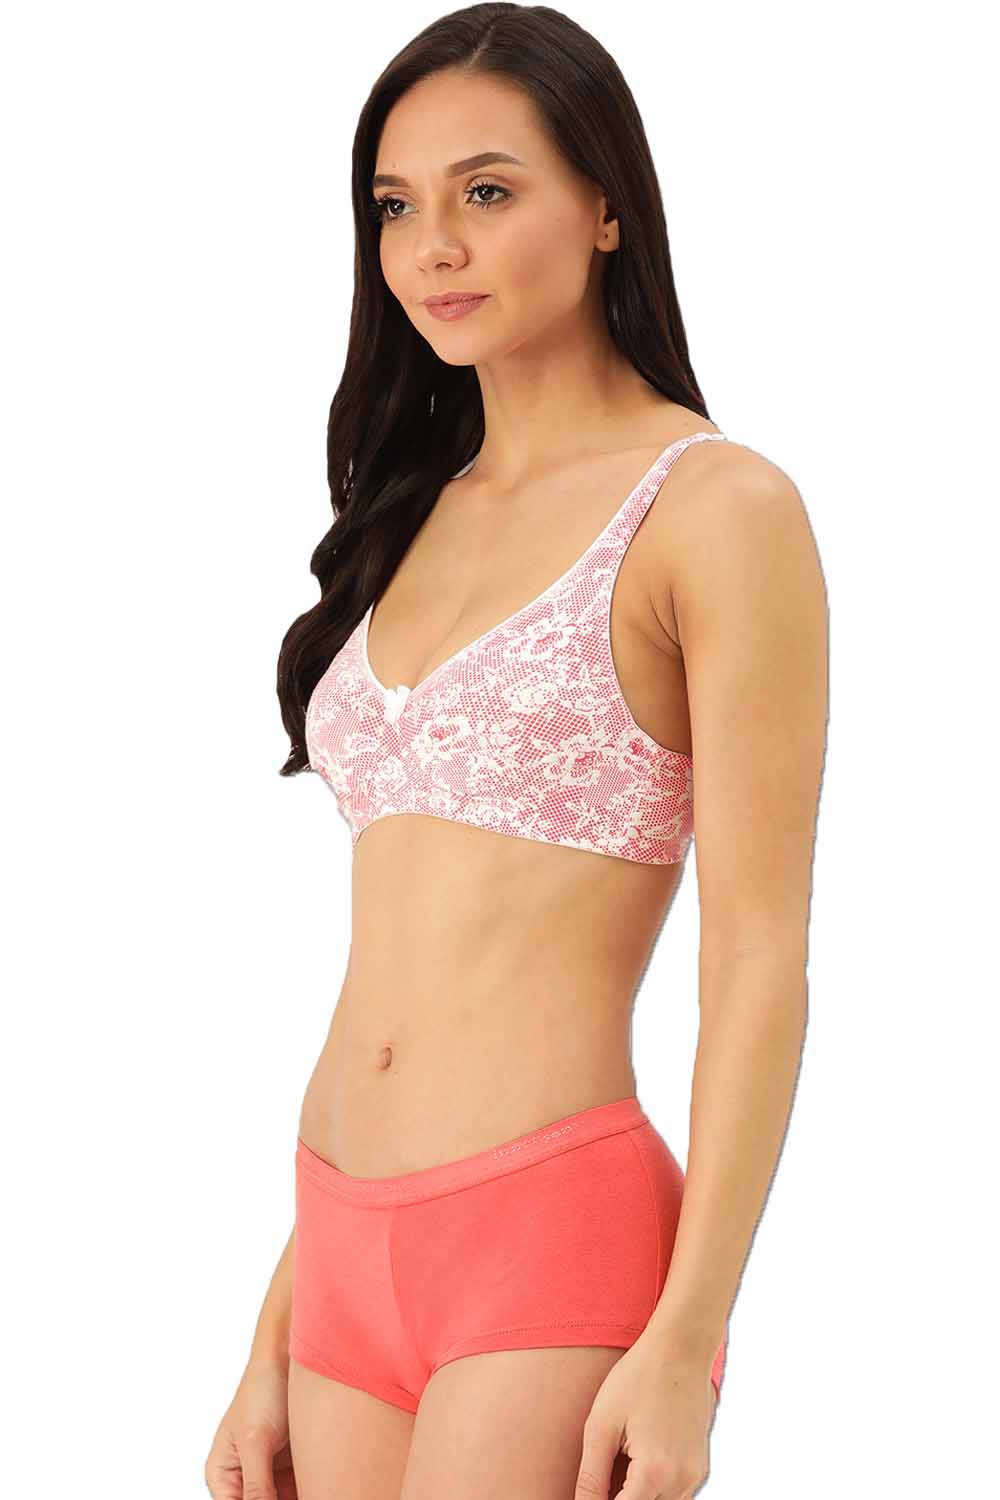 Buy Inner Sense Organic Cotton Antimicrobial Seamless Side Support Bra  Panty Set Online In India At Discounted Prices